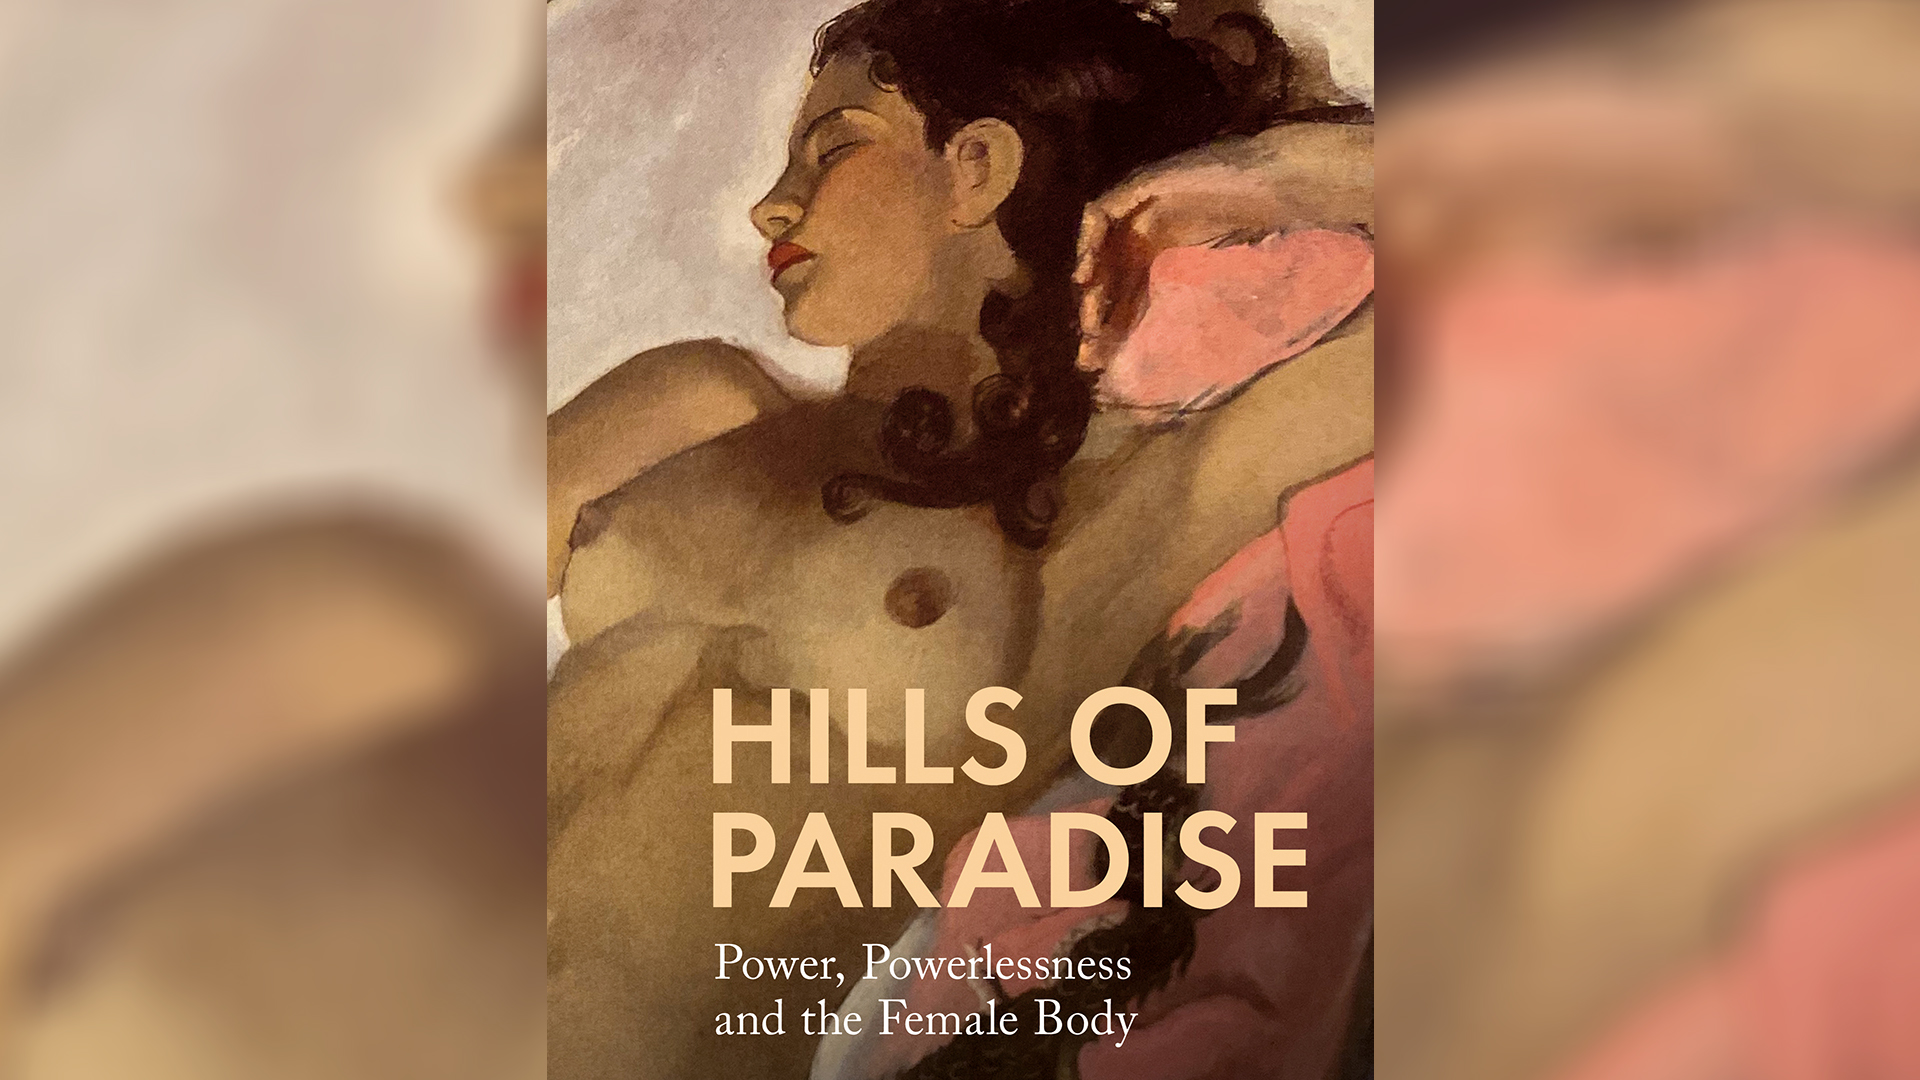 Hills of Paradise: Power, Powerlessness and the Female Body - Fair Observer